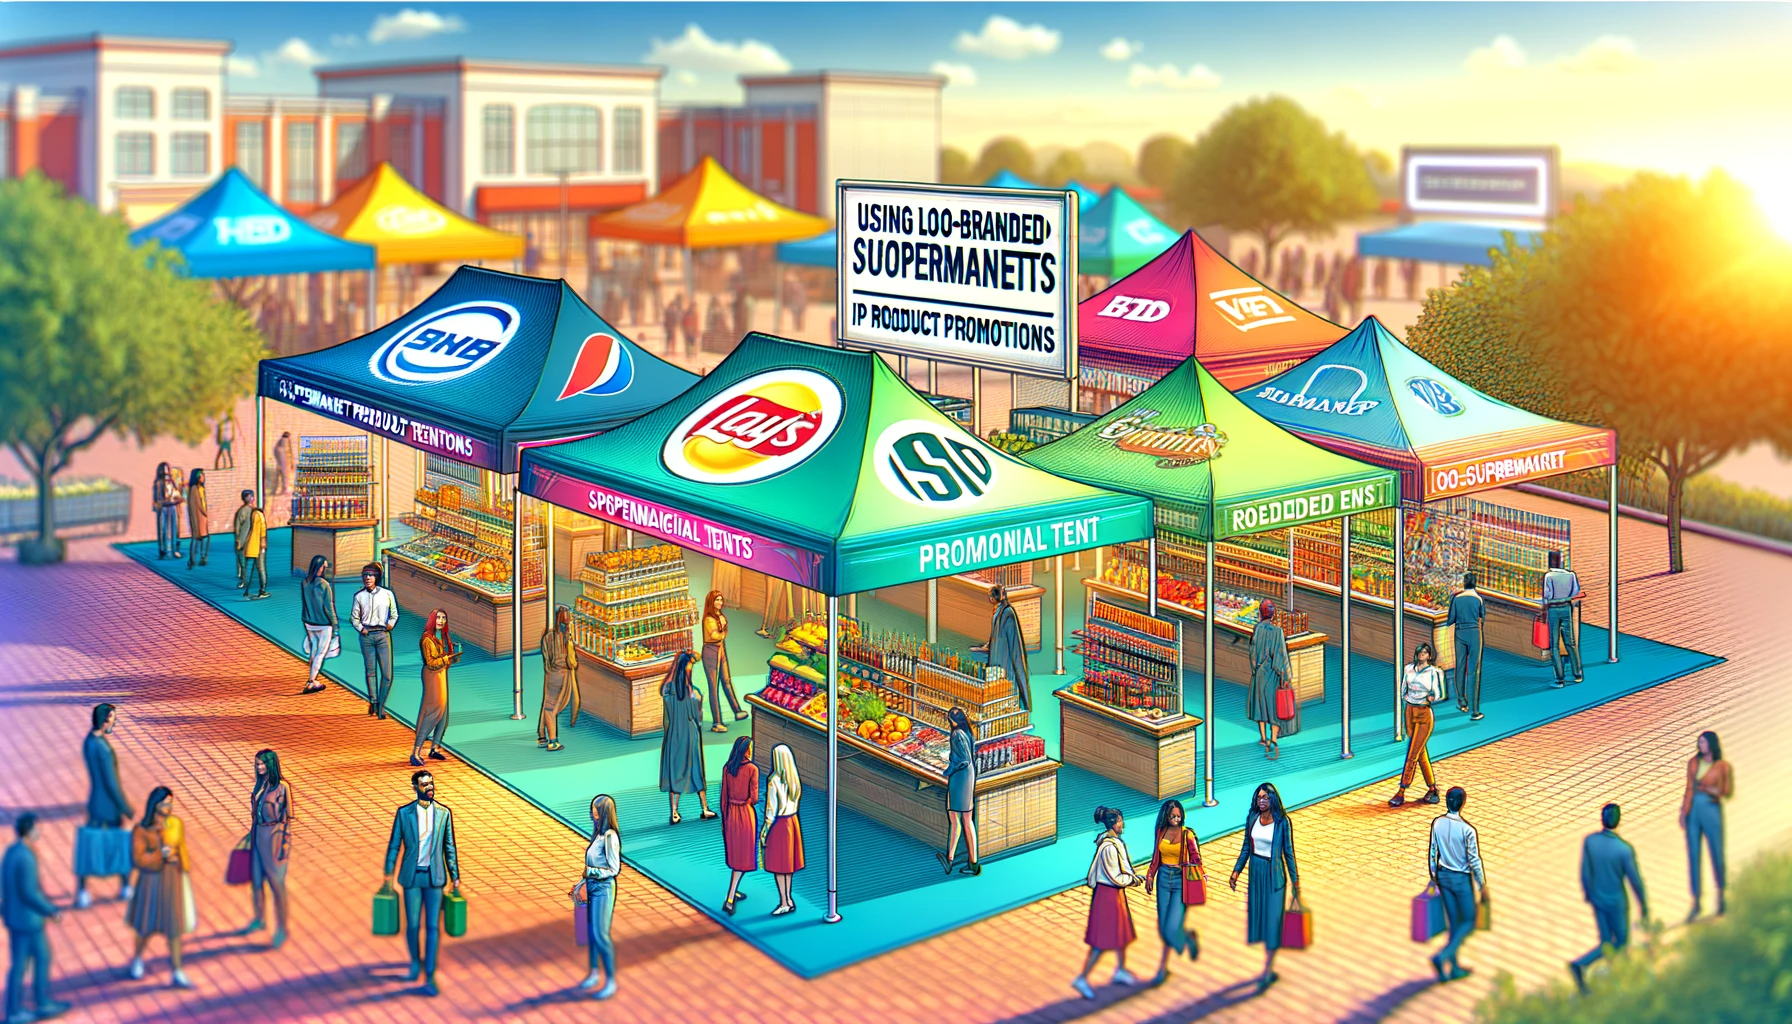 market-in-store-product-branding-marketing-tents